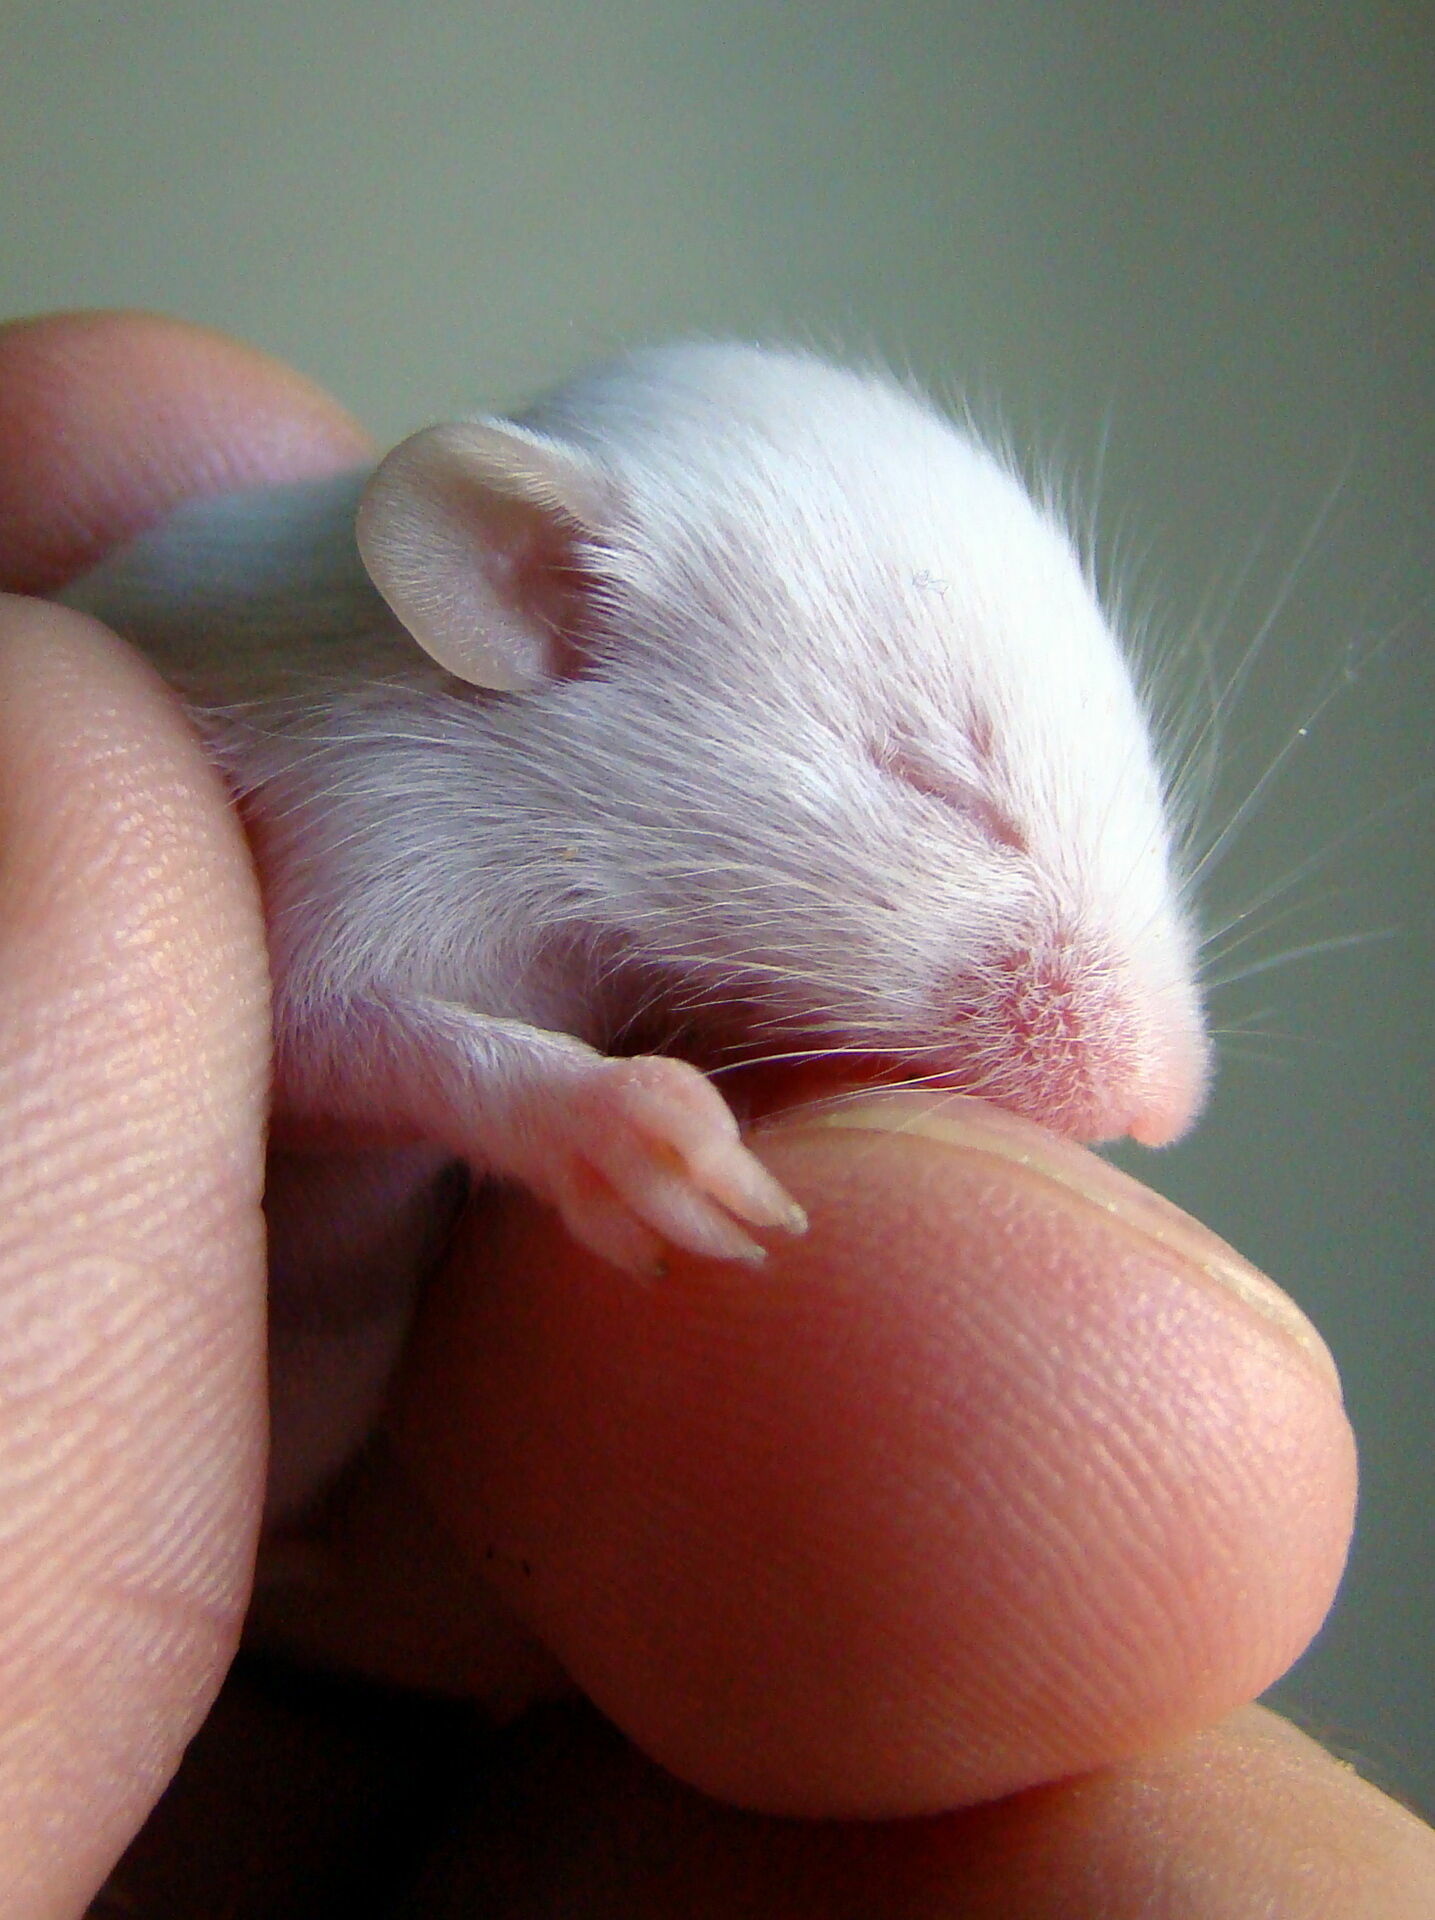 American scientists have grown a mouse with a beating heart from the stem cells